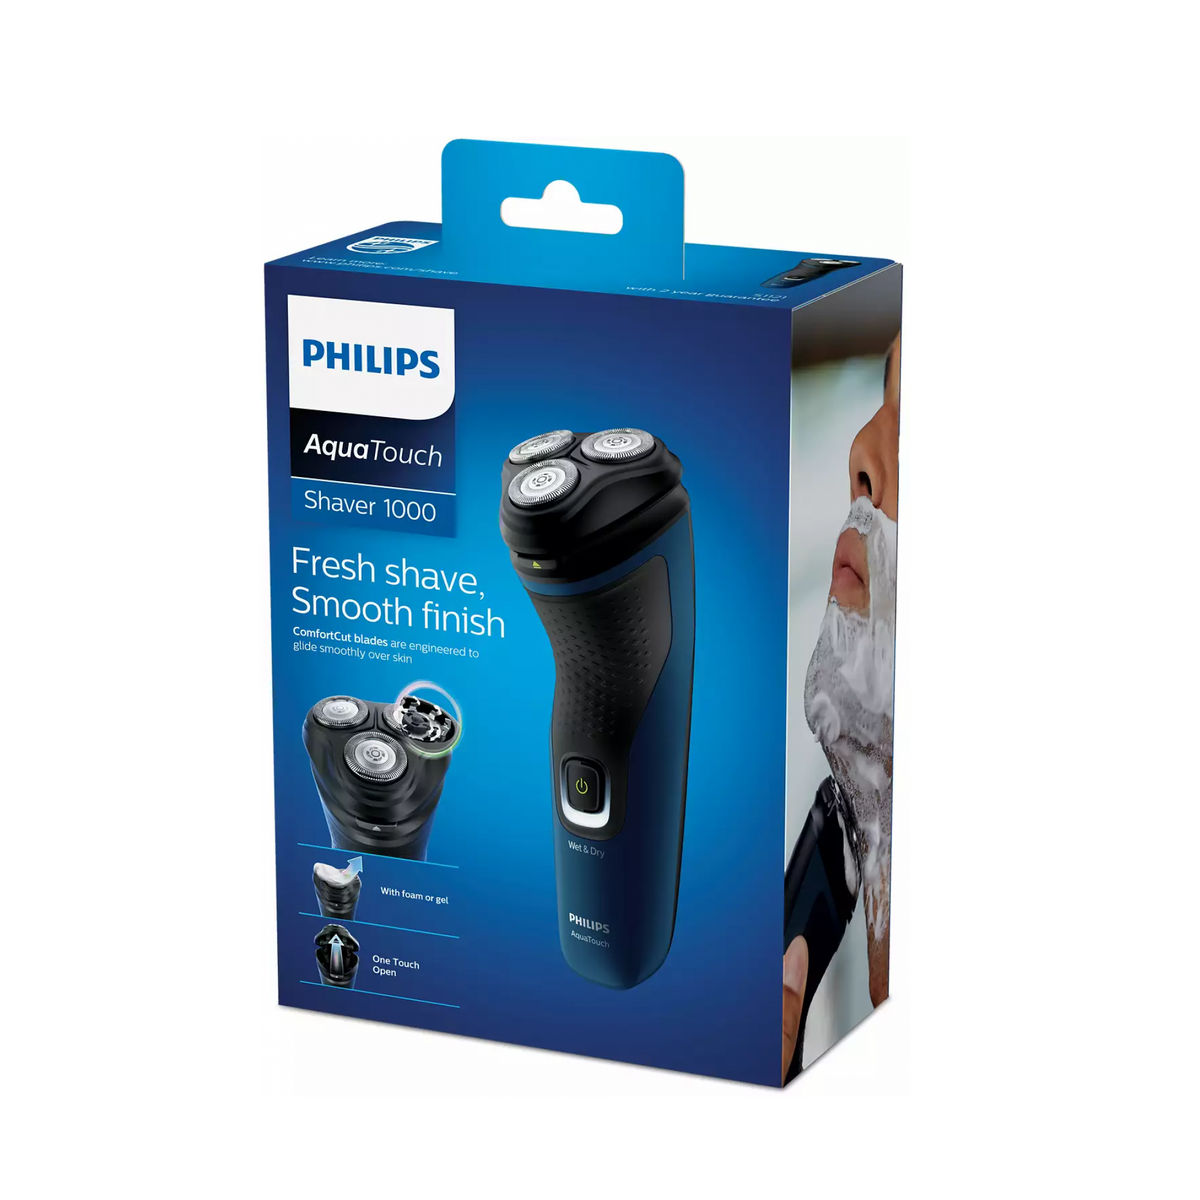 Philips AquaTouch Shaver 1000 Wet or Dry Electric Shaver - Blue &amp; Black | S1121 from Philips - DID Electrical